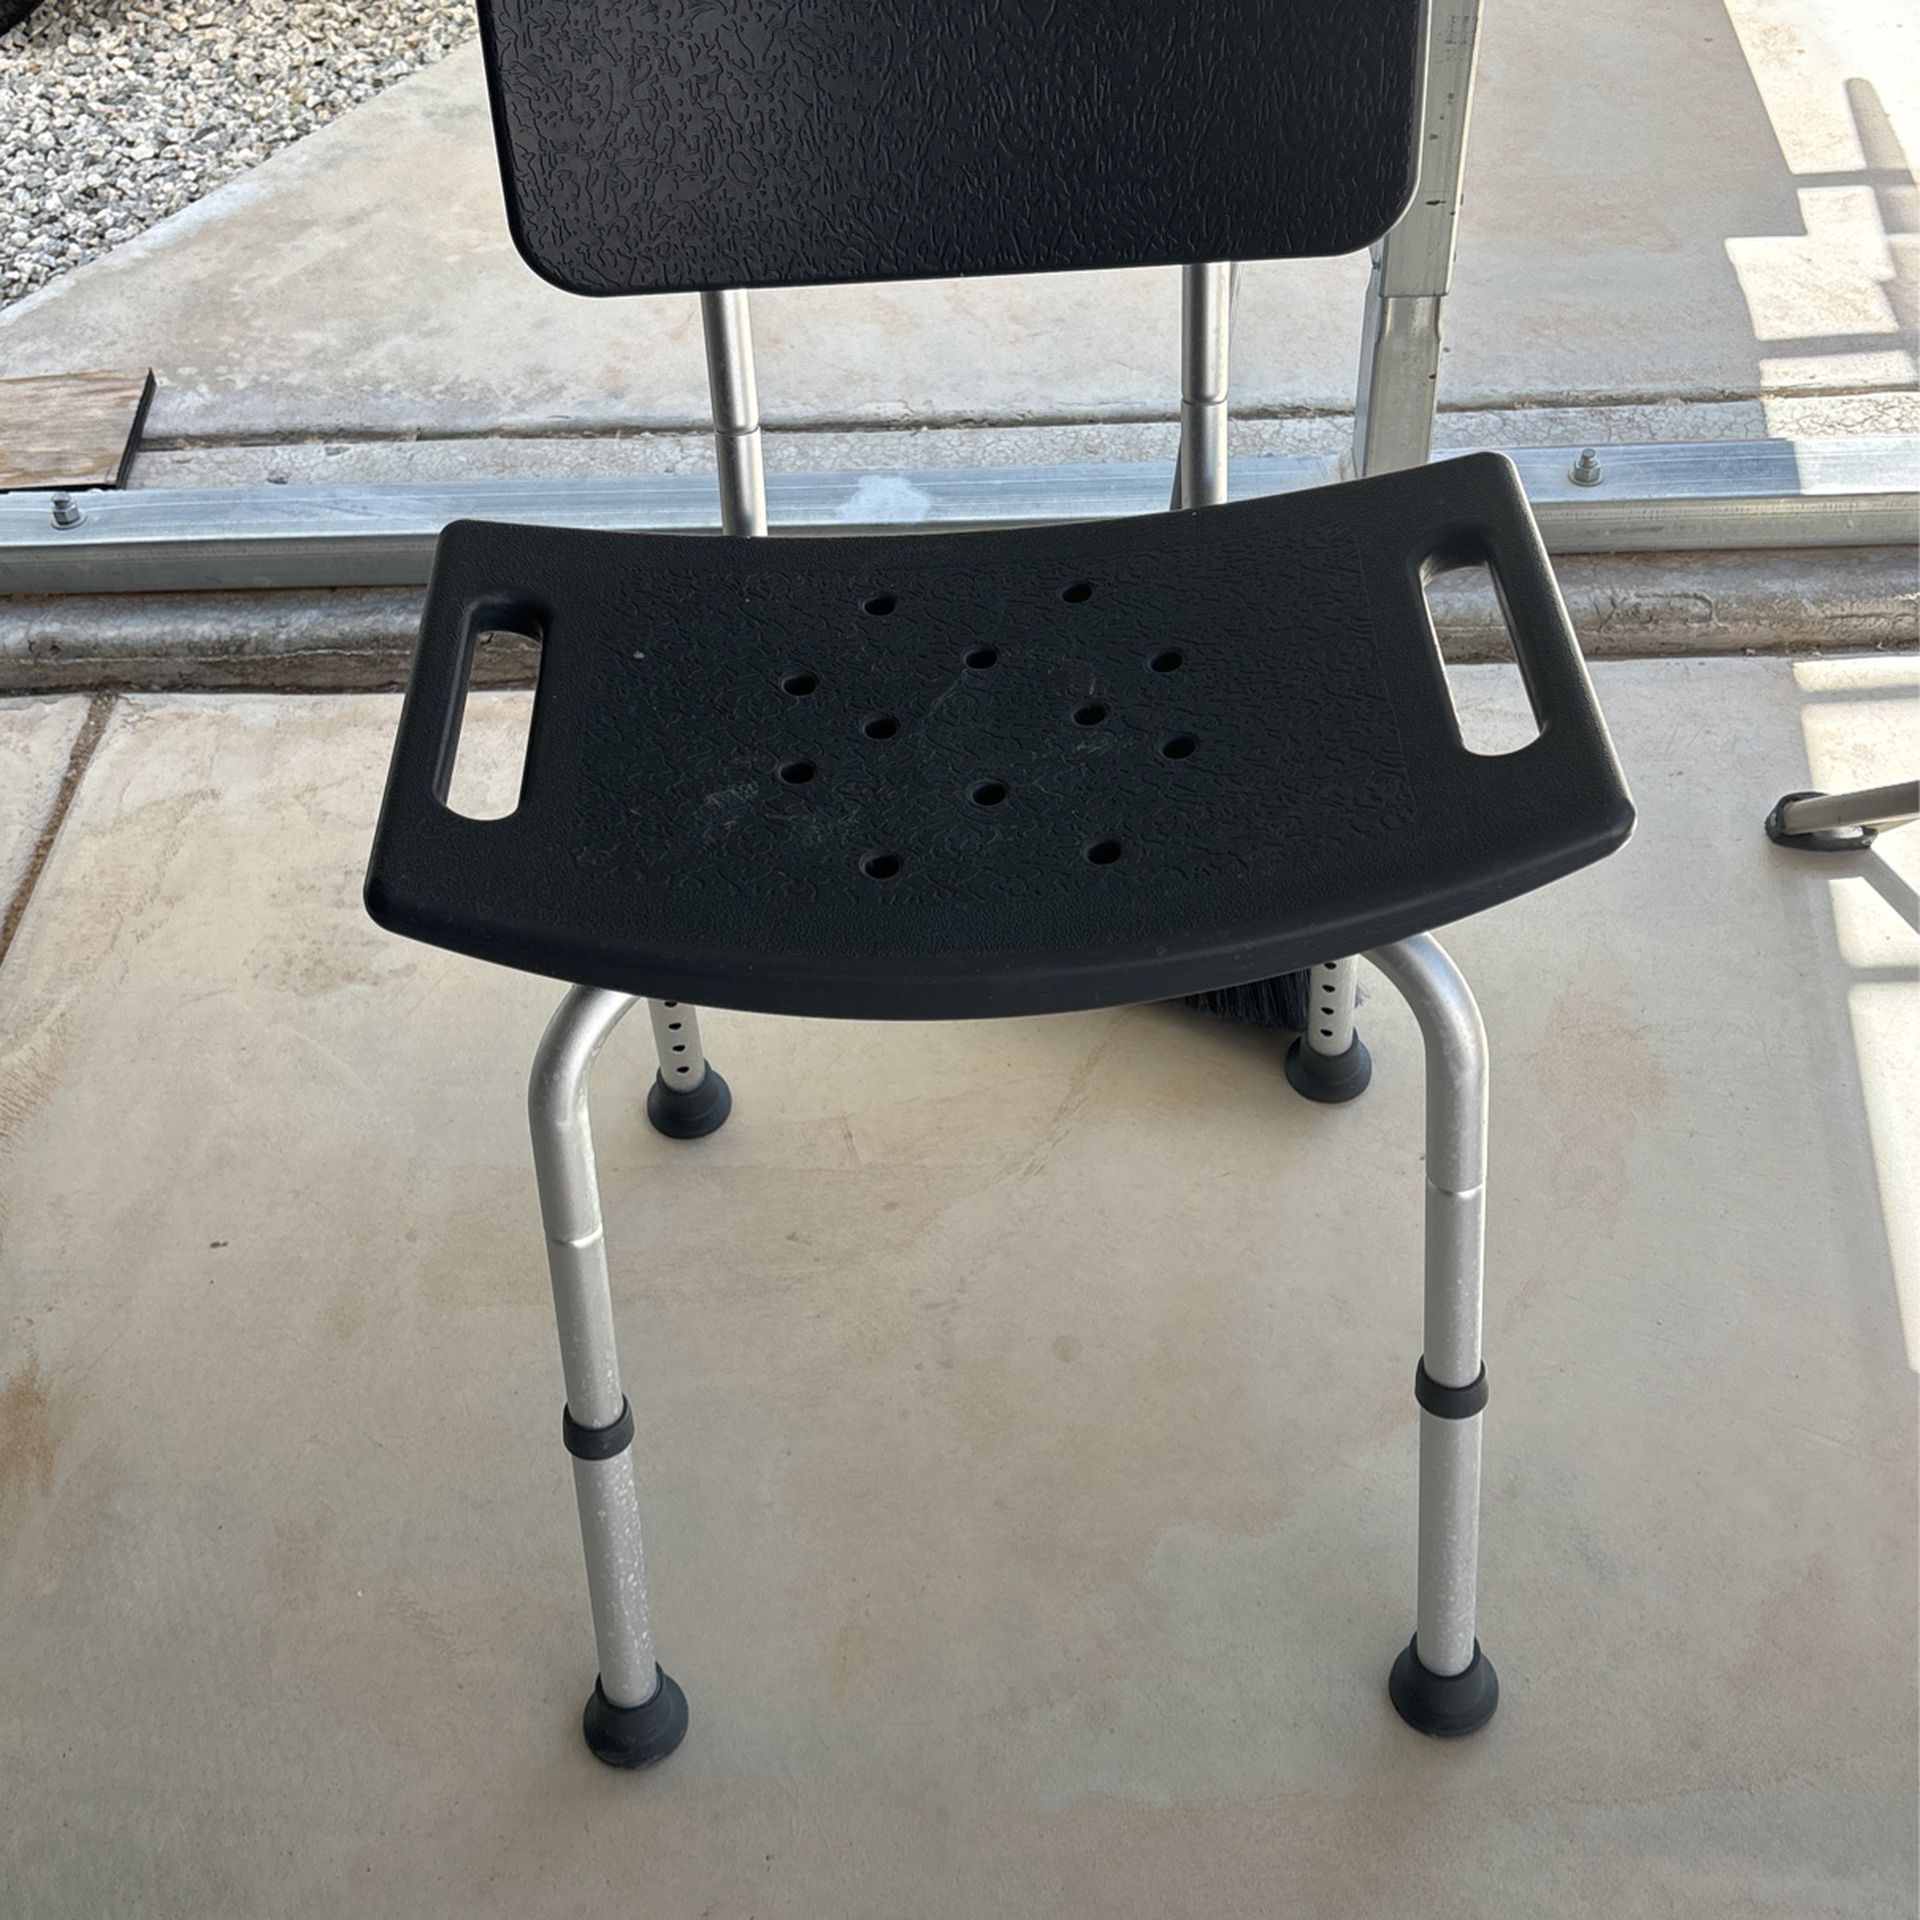 REDUCED PRICE Shower Chair